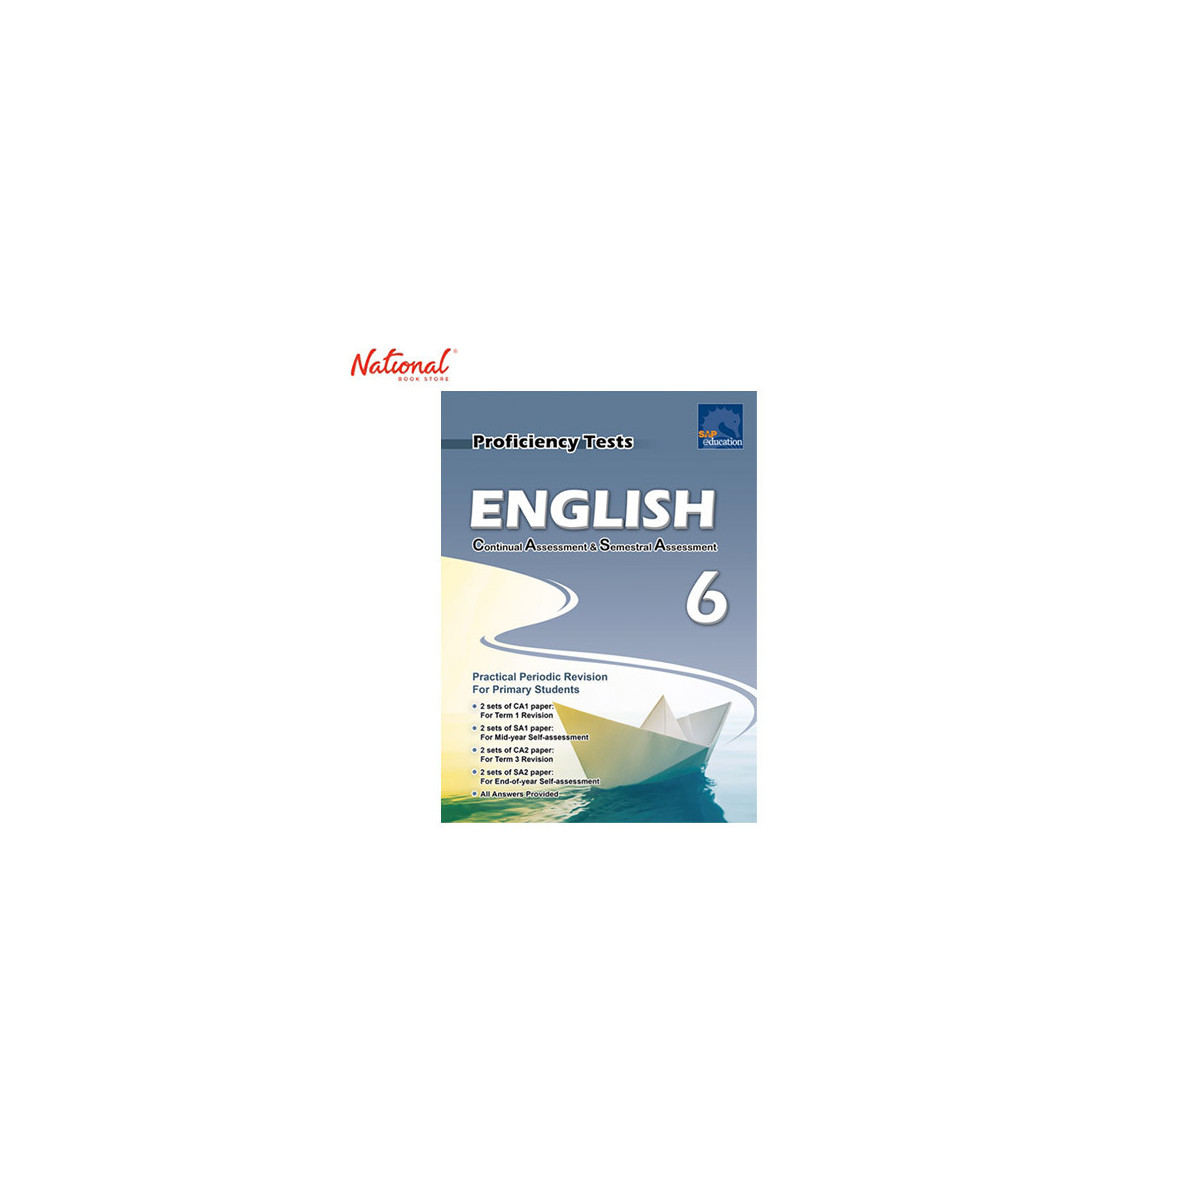 CONTINUAL ASSESSMENT AND SEMESTRAL ASSESSMENT ENGLISH 6